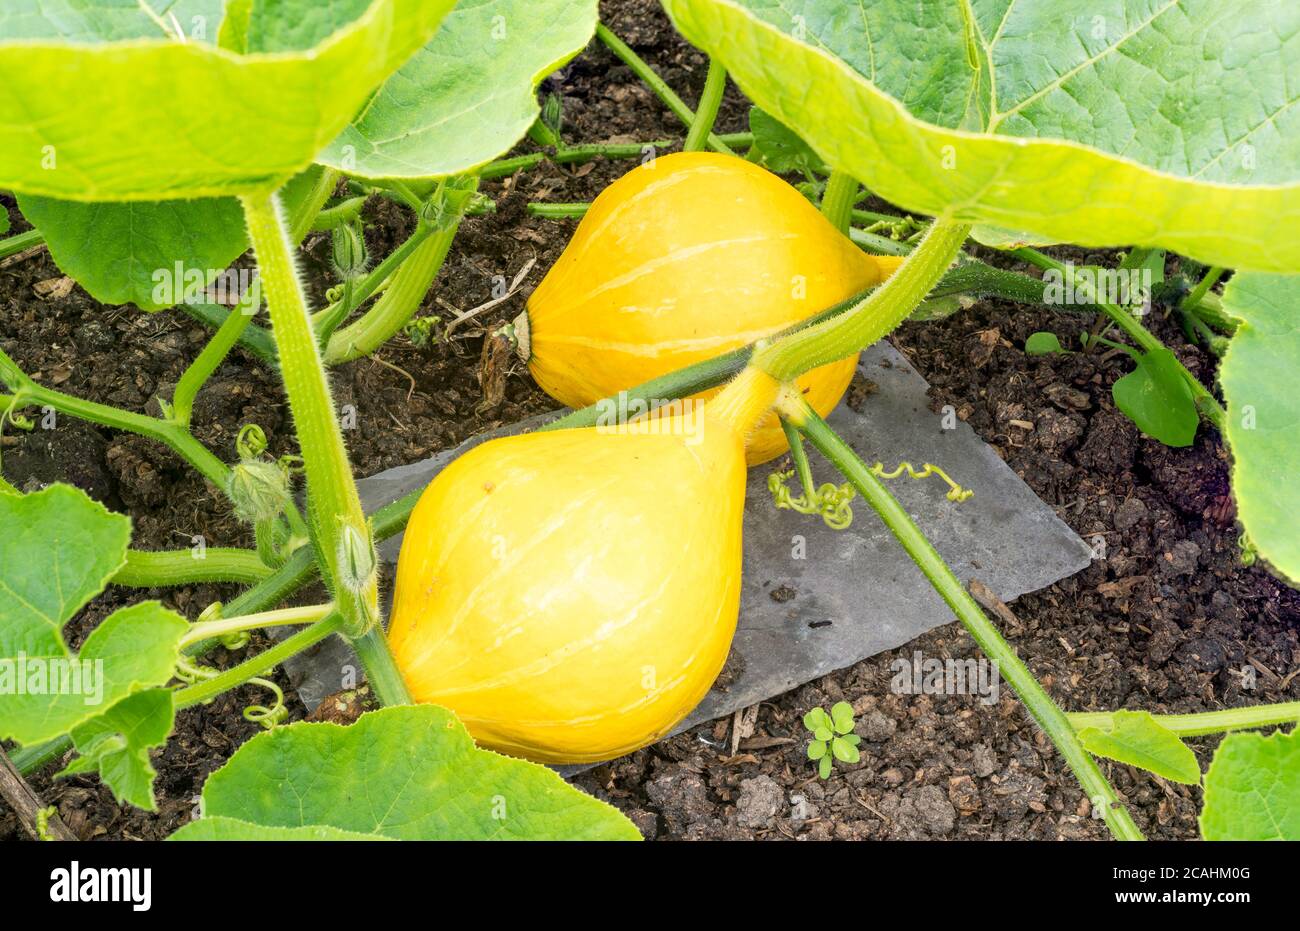 Immature uchiki kuri squashes growing in an a allotment garden and supported on a slate to prevent mould, England, UK Stock Photo